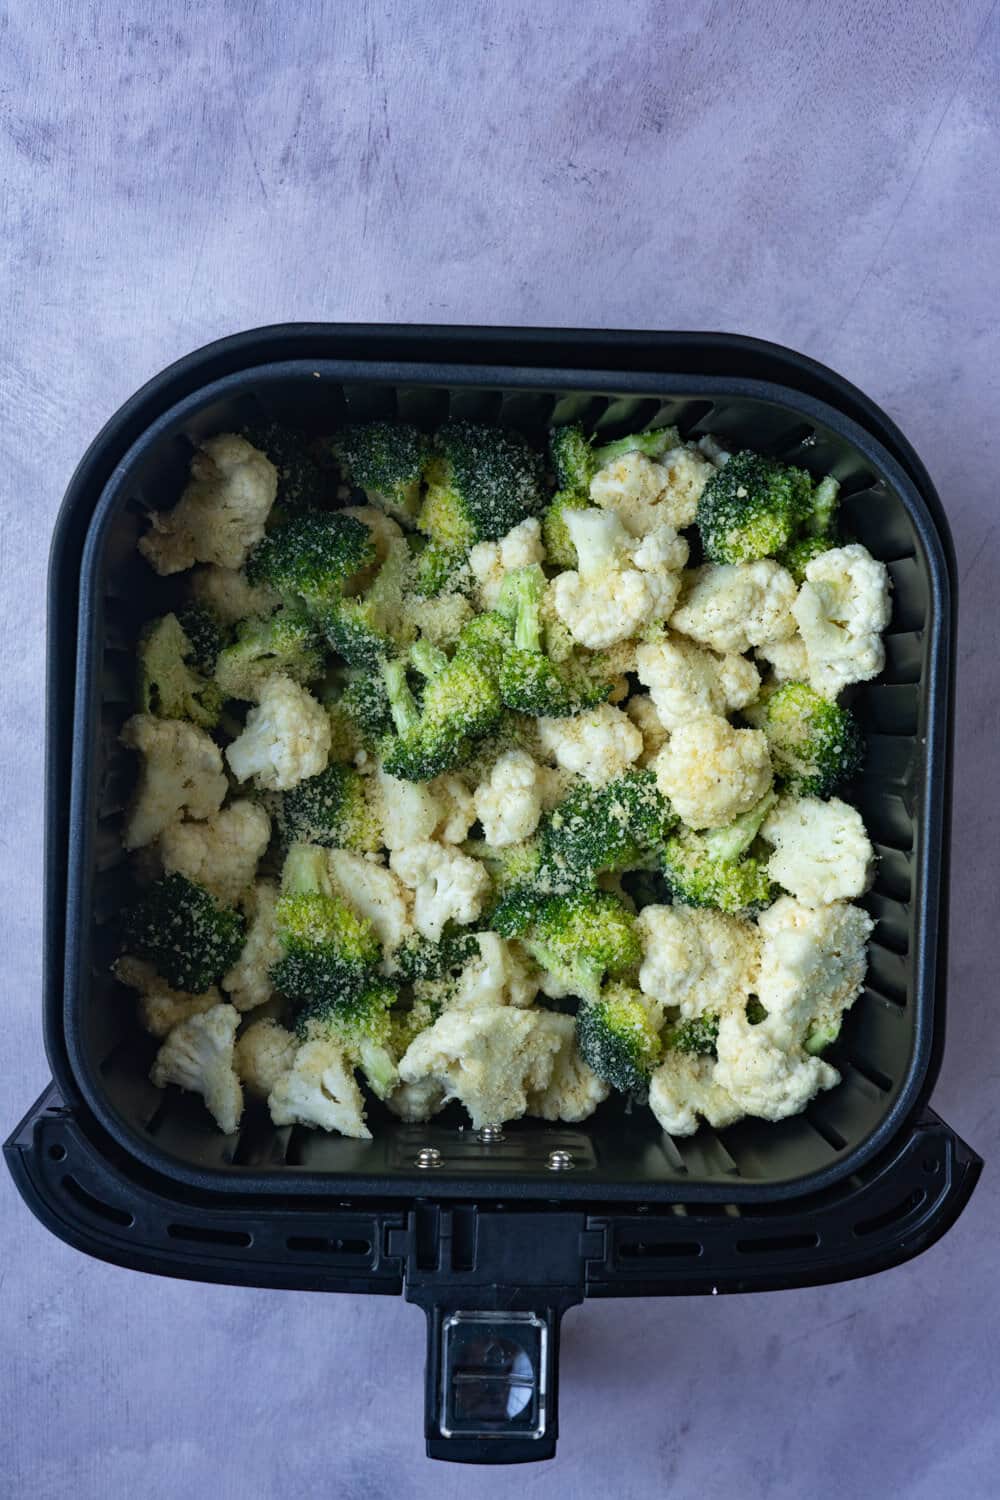 Cauliflower and broccoli in the air fryer basket before cooking.